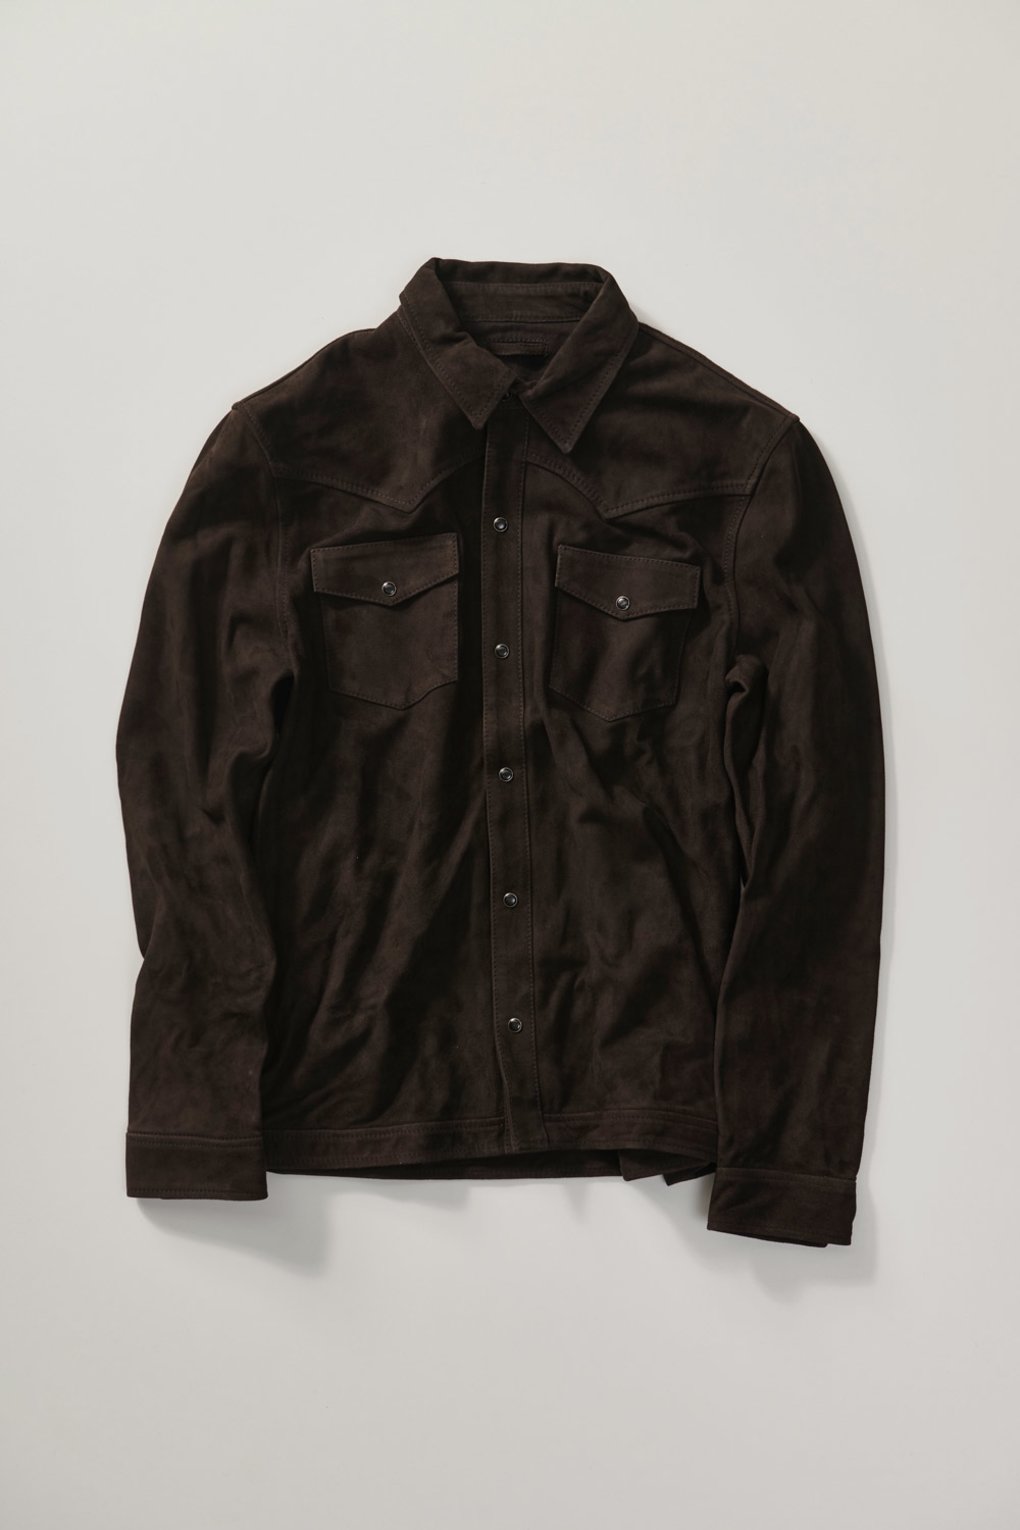 Shirt-jacket in suede leather